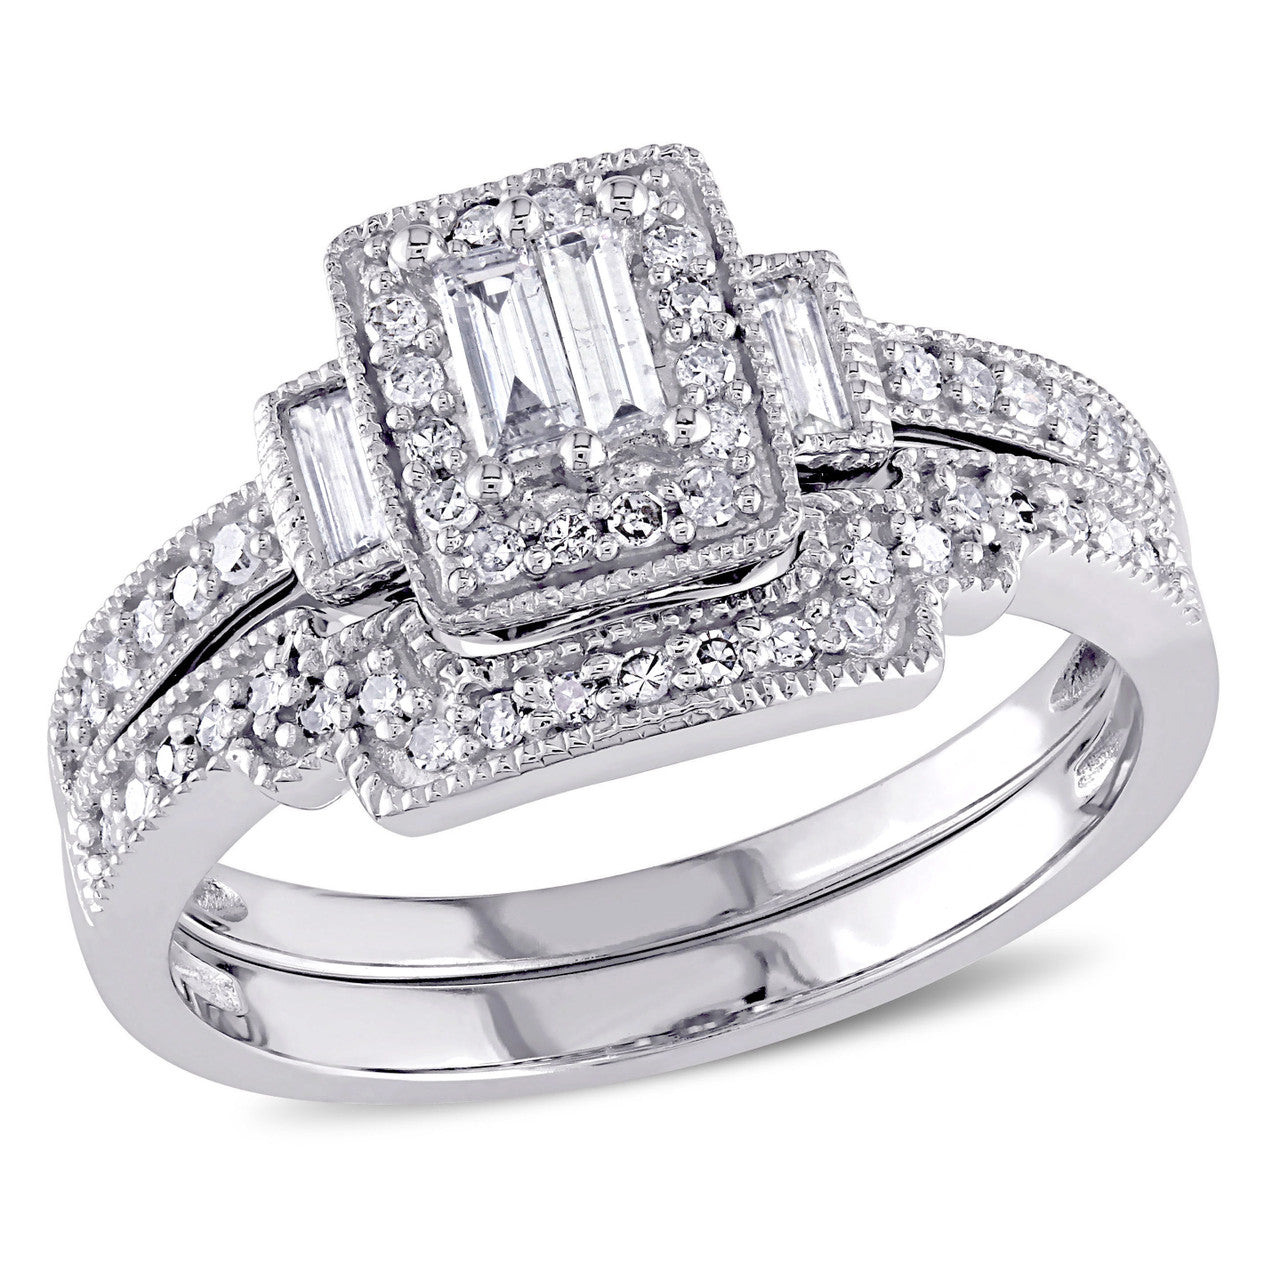 Ice Jewellery 2/5 CT Parallel Baguette and Round Diamonds TW Bridal Set Ring in 10k White Gold - 75000004429 | Ice Jewellery Australia